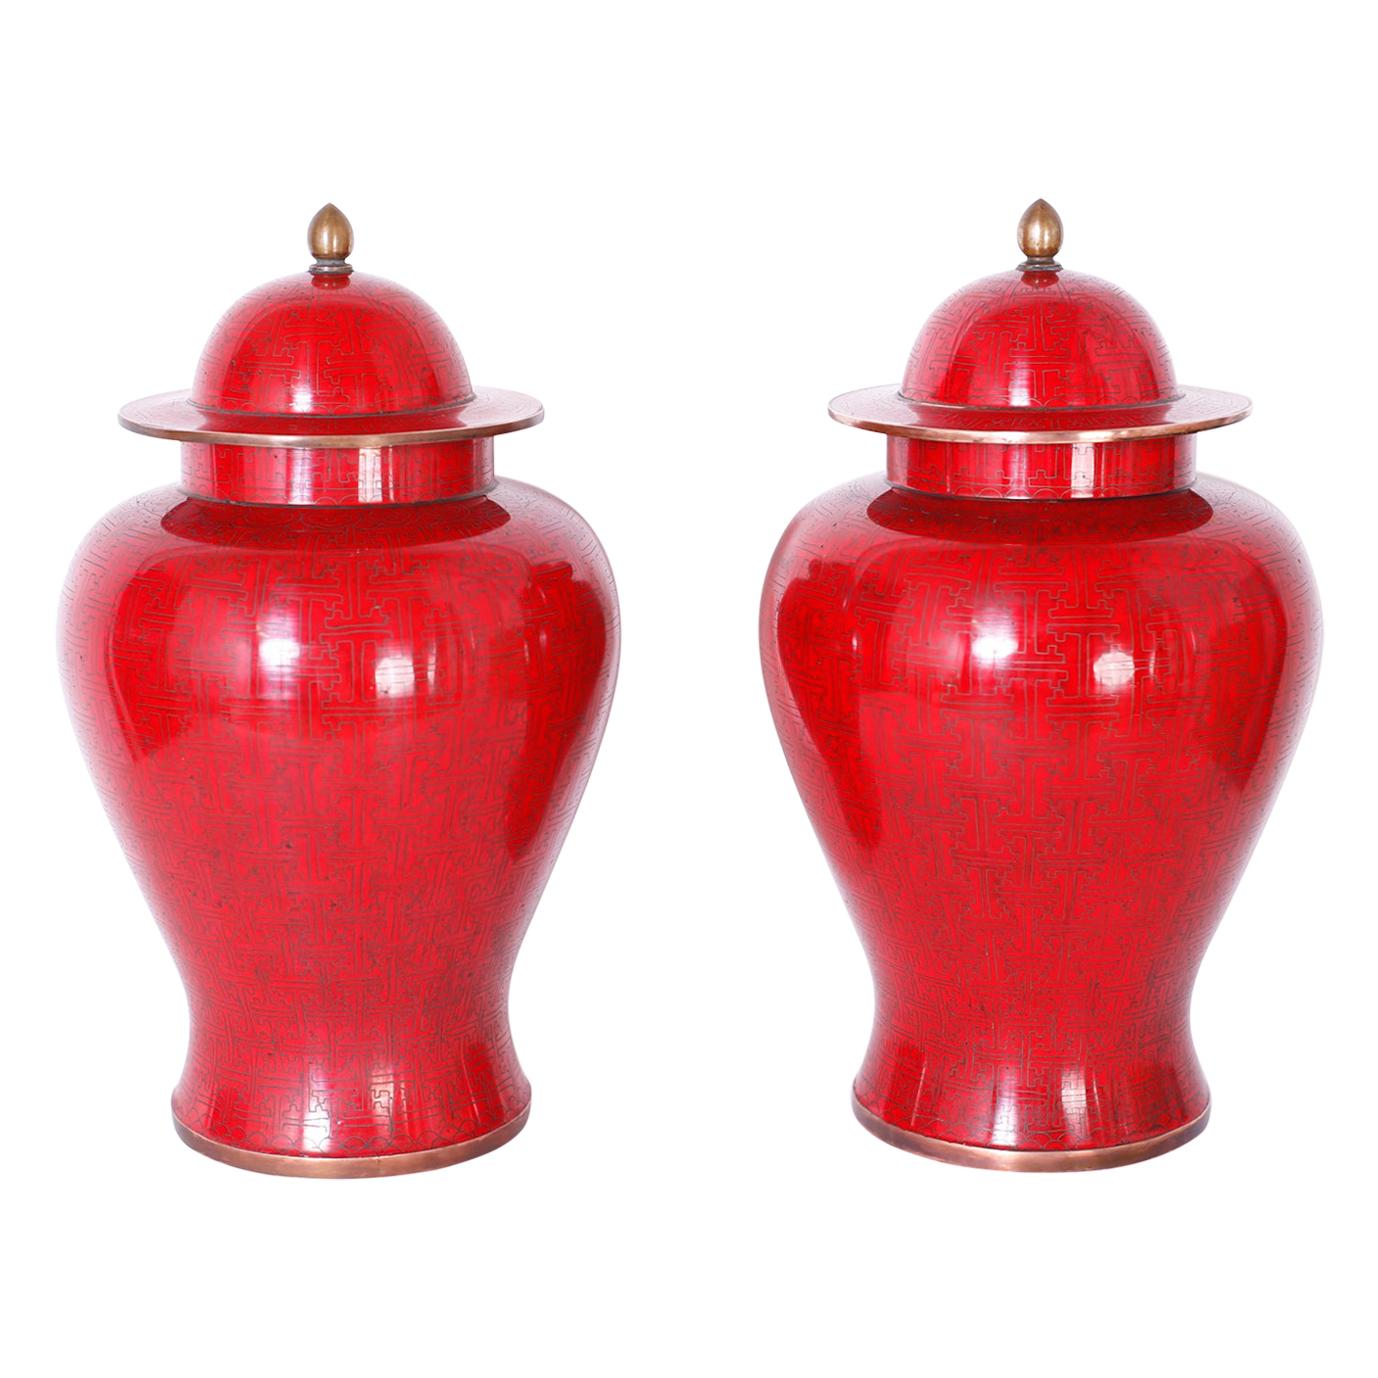 Pair of Mid Century Red Chinese Cloisonné Lidded Jars